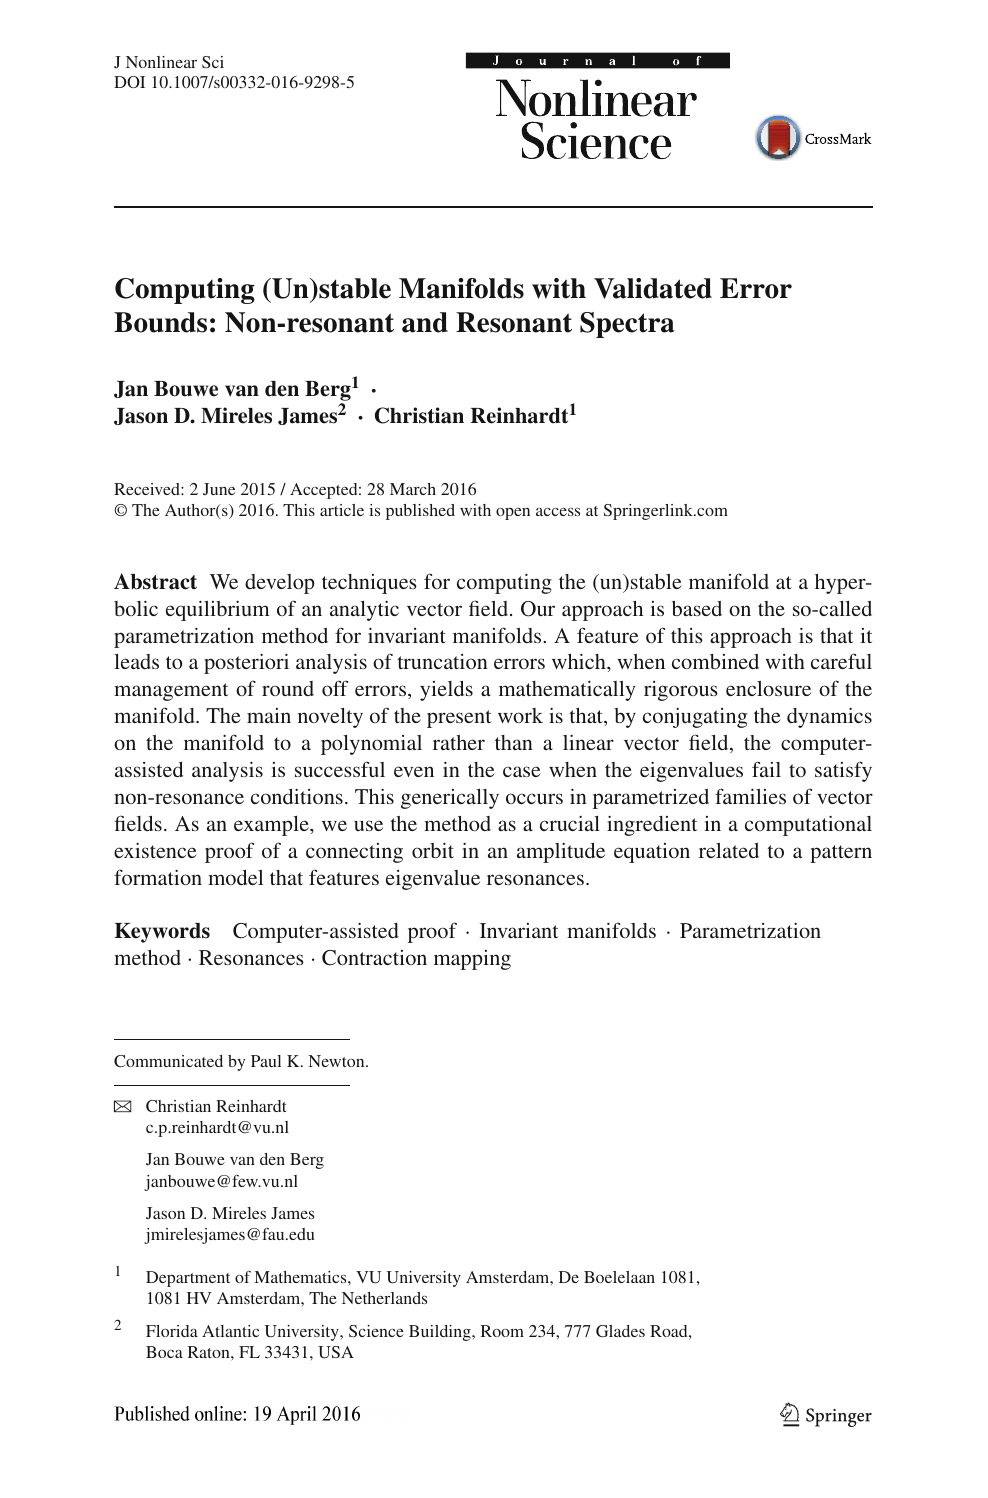 Computing Un Stable Manifolds With Validated Error Bounds Non Resonant And Resonant Spectra Topic Of Research Paper In Physical Sciences Download Scholarly Article Pdf And Read For Free On Cyberleninka Open Science Hub